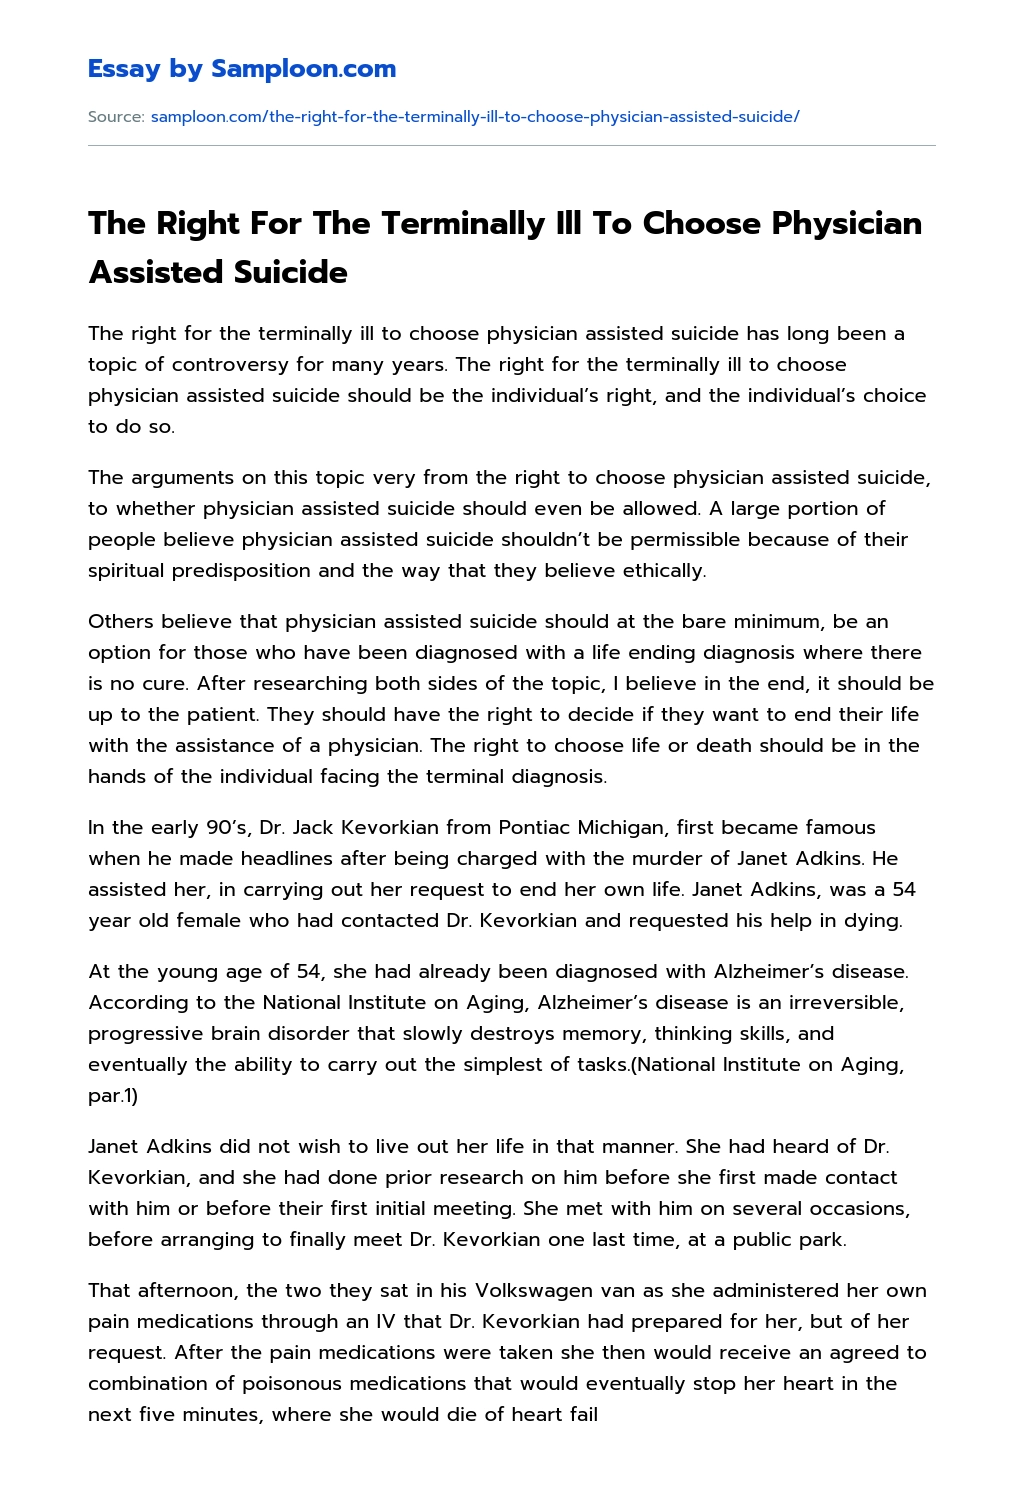 The Right For The Terminally Ill To Choose Physician Assisted Suicide essay